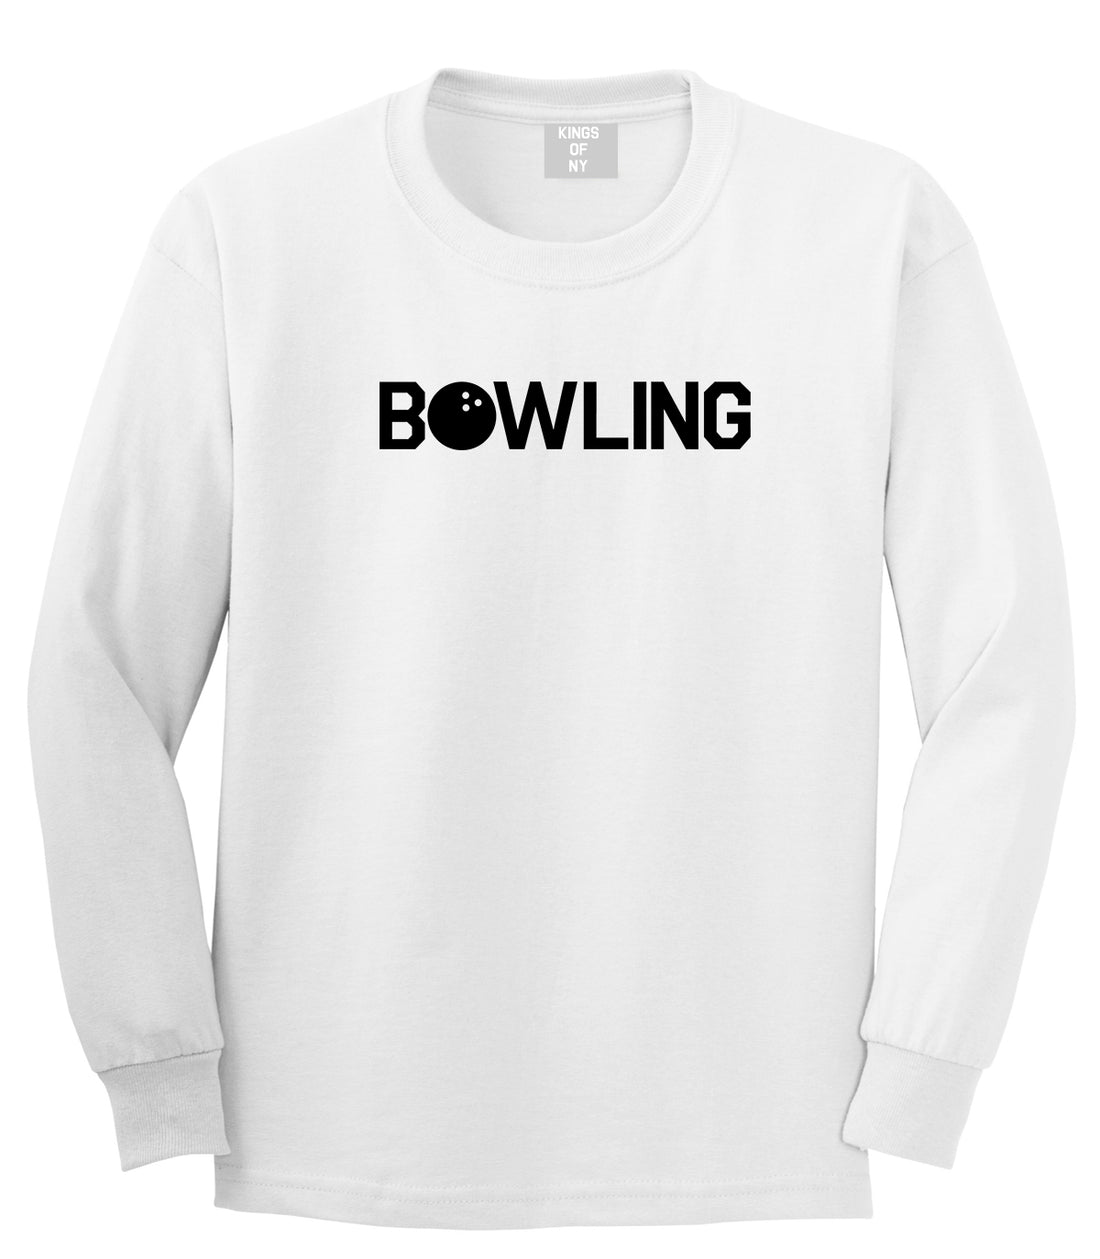 Bowling White Long Sleeve T-Shirt by Kings Of NY